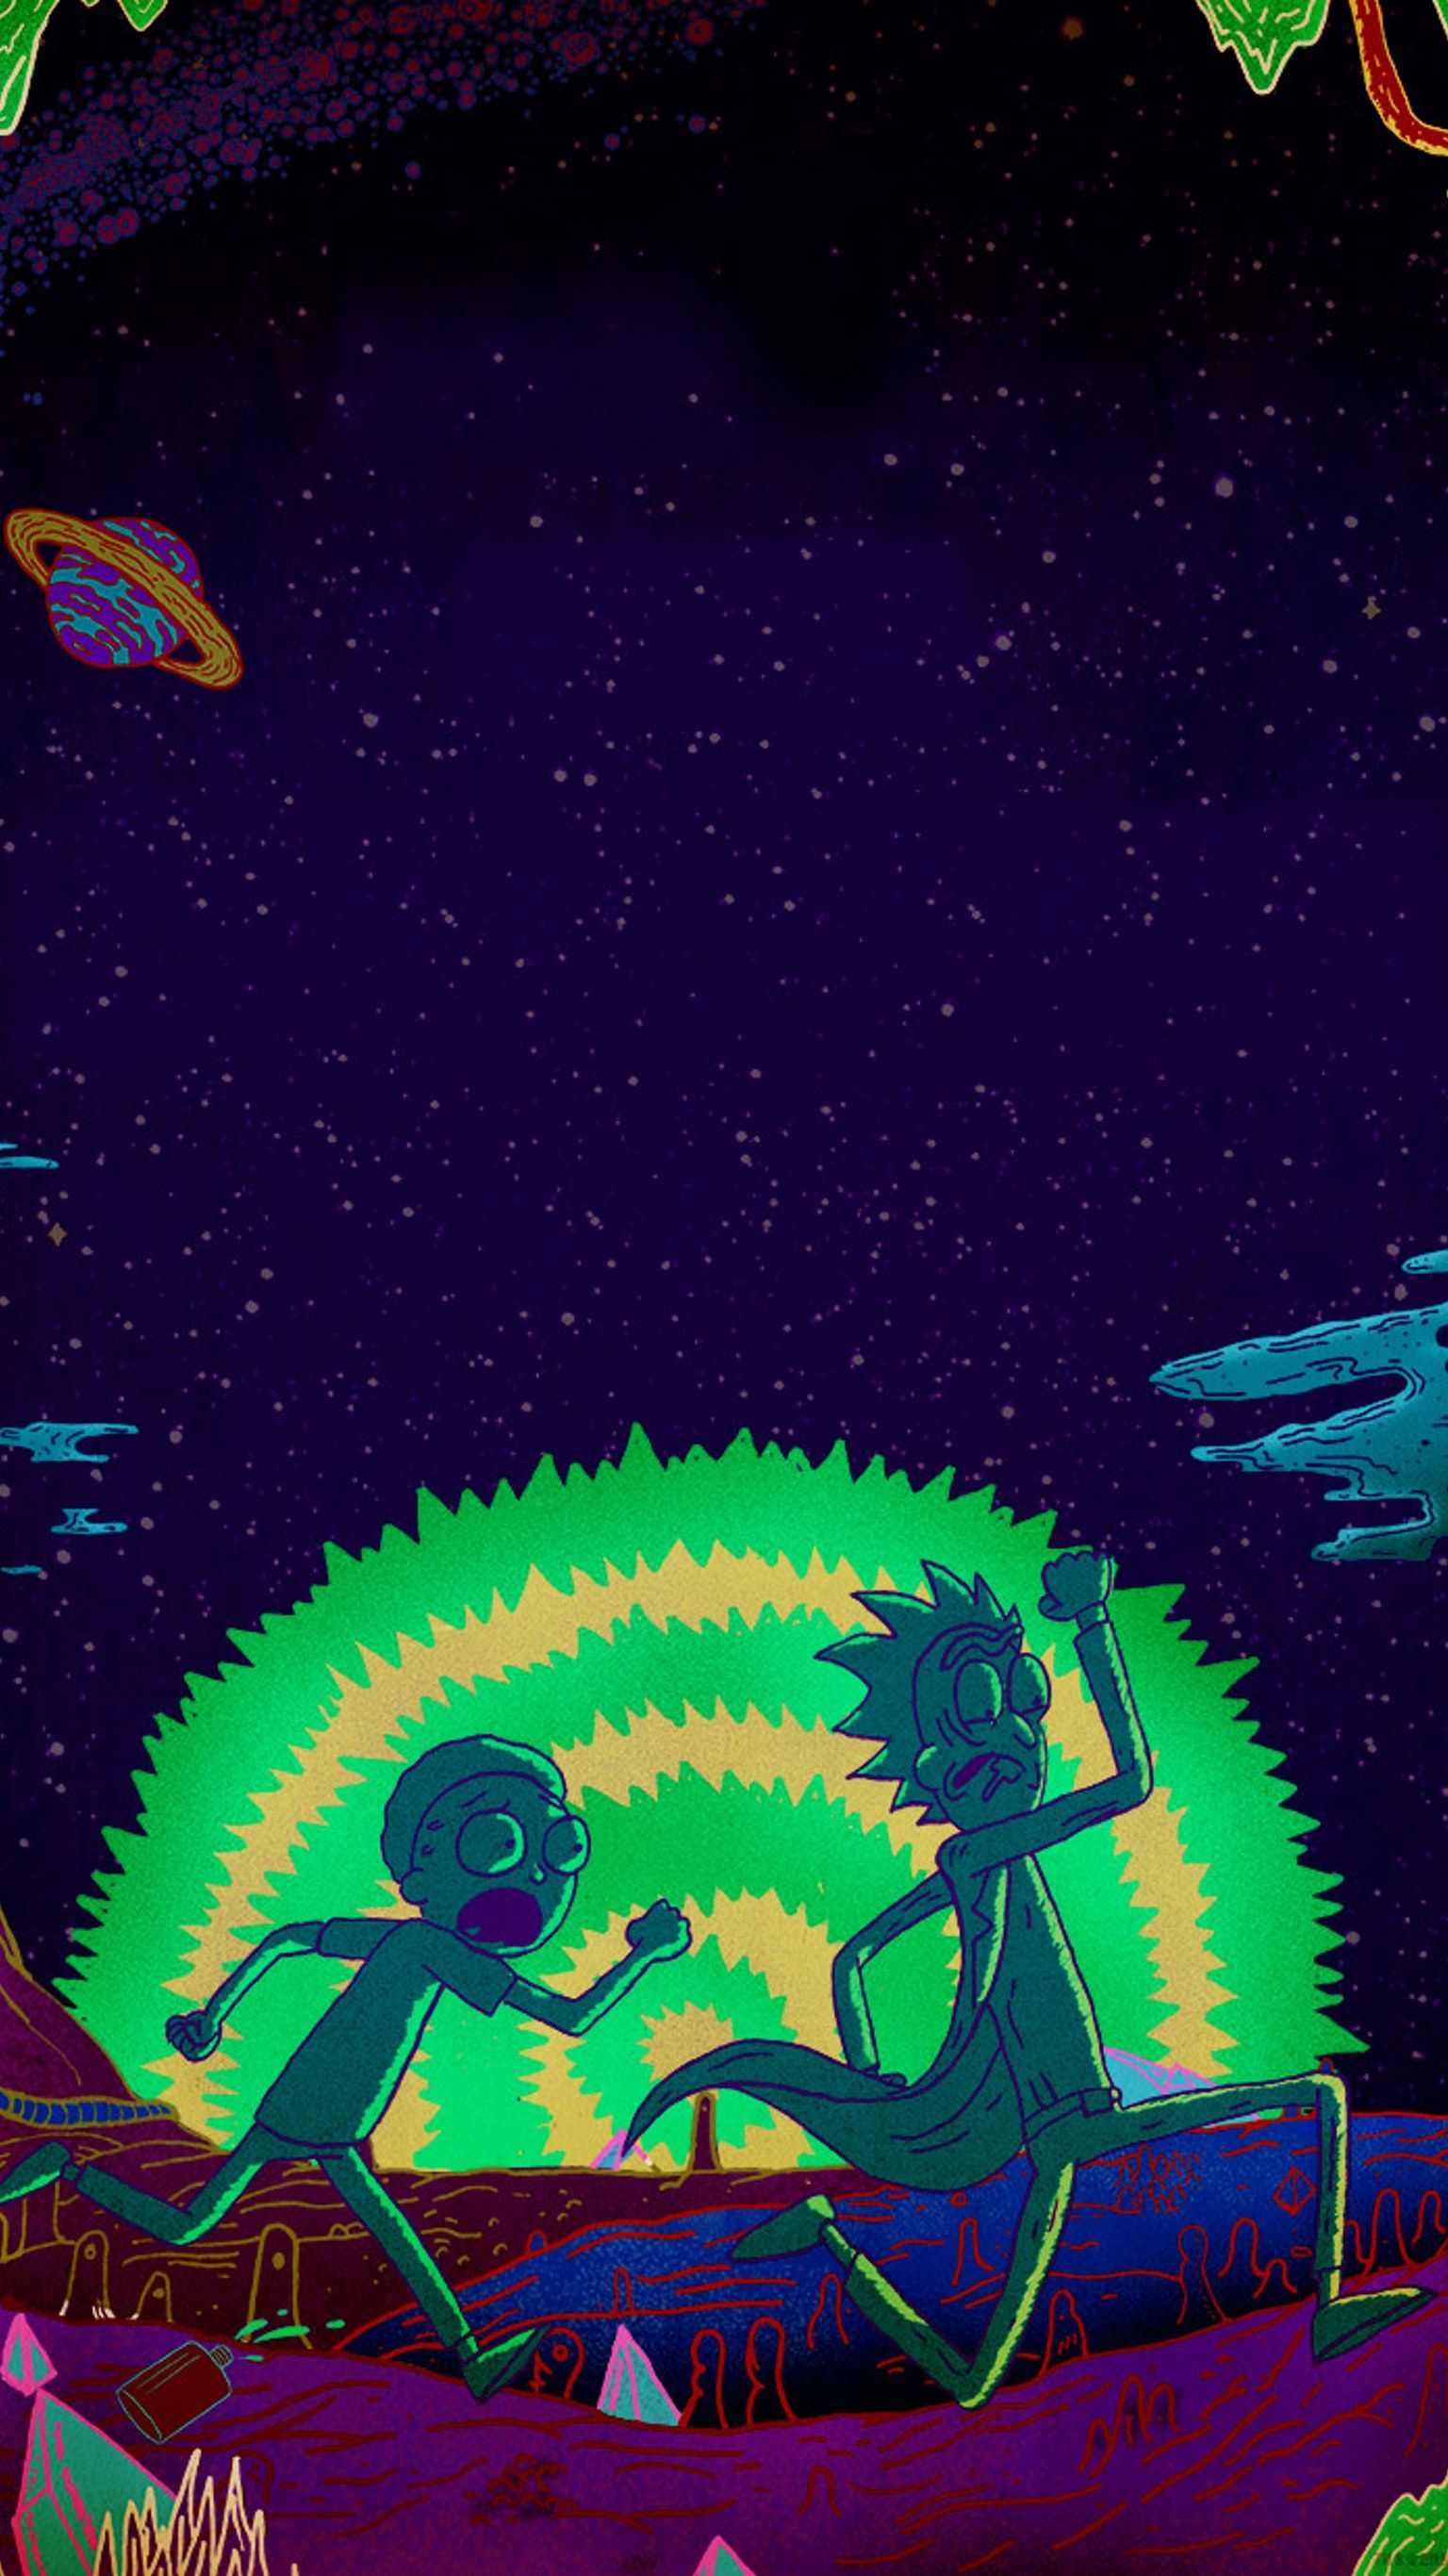 Rick And Morty Phone Wallpapers